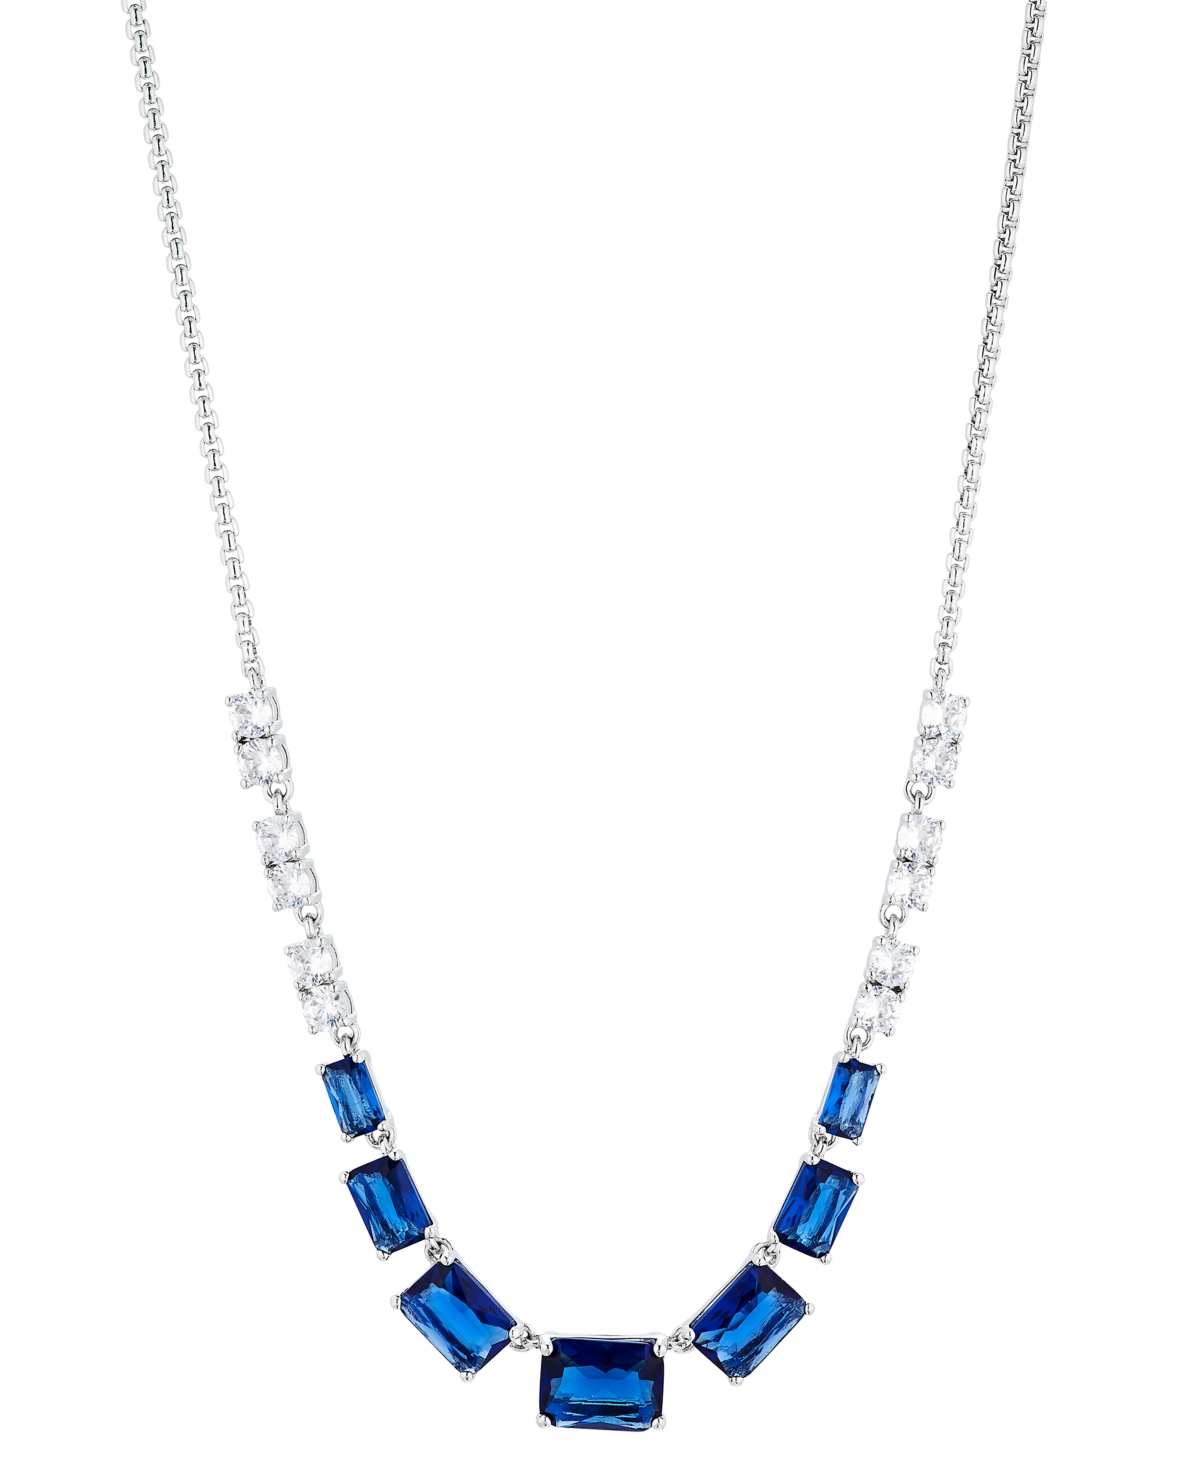 Eliot Danori Silver-tone Mixed Crystal Statement Necklace, 16" + 2" Extender, Created For Macy's In Metallic